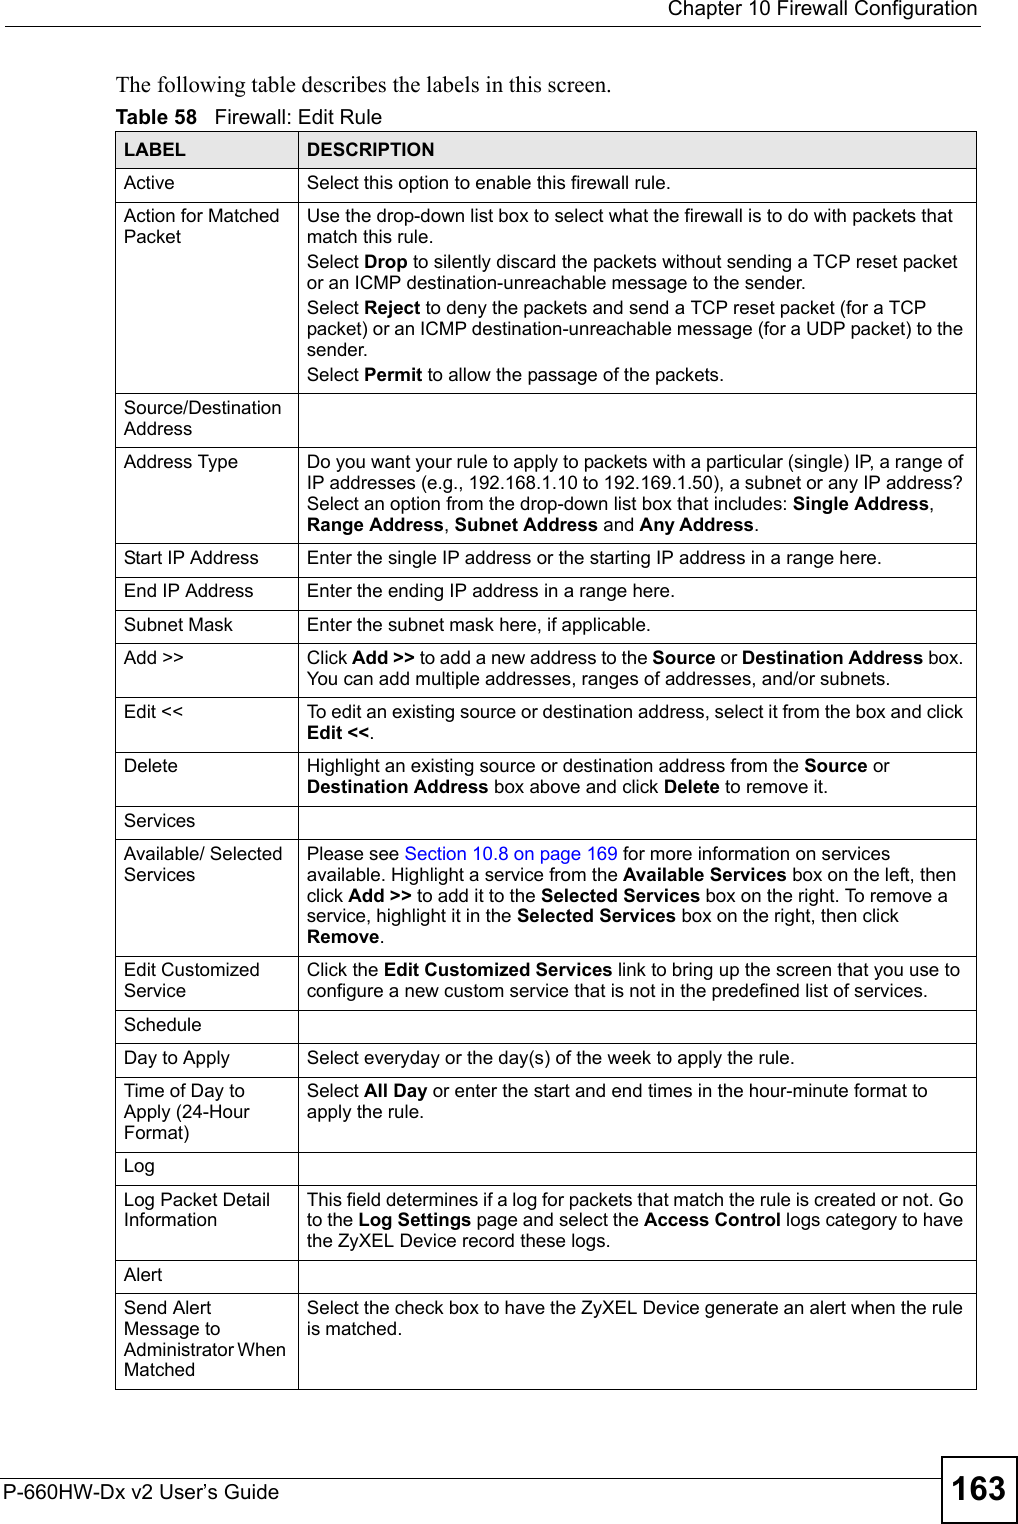  Chapter 10 Firewall ConfigurationP-660HW-Dx v2 User’s Guide 163The following table describes the labels in this screen.Table 58   Firewall: Edit RuleLABEL DESCRIPTIONActive Select this option to enable this firewall rule. Action for Matched PacketUse the drop-down list box to select what the firewall is to do with packets that match this rule. Select Drop to silently discard the packets without sending a TCP reset packet or an ICMP destination-unreachable message to the sender.Select Reject to deny the packets and send a TCP reset packet (for a TCP packet) or an ICMP destination-unreachable message (for a UDP packet) to the sender.Select Permit to allow the passage of the packets. Source/Destination AddressAddress Type Do you want your rule to apply to packets with a particular (single) IP, a range of IP addresses (e.g., 192.168.1.10 to 192.169.1.50), a subnet or any IP address? Select an option from the drop-down list box that includes: Single Address, Range Address, Subnet Address and Any Address. Start IP Address Enter the single IP address or the starting IP address in a range here. End IP Address Enter the ending IP address in a range here.Subnet Mask Enter the subnet mask here, if applicable.Add &gt;&gt; Click Add &gt;&gt; to add a new address to the Source or Destination Address box. You can add multiple addresses, ranges of addresses, and/or subnets.Edit &lt;&lt; To edit an existing source or destination address, select it from the box and click Edit &lt;&lt;.Delete Highlight an existing source or destination address from the Source or Destination Address box above and click Delete to remove it.ServicesAvailable/ Selected ServicesPlease see Section 10.8 on page 169 for more information on services available. Highlight a service from the Available Services box on the left, then click Add &gt;&gt; to add it to the Selected Services box on the right. To remove a service, highlight it in the Selected Services box on the right, then click Remove.Edit Customized ServiceClick the Edit Customized Services link to bring up the screen that you use to configure a new custom service that is not in the predefined list of services.ScheduleDay to Apply Select everyday or the day(s) of the week to apply the rule.Time of Day to Apply (24-Hour Format)Select All Day or enter the start and end times in the hour-minute format to apply the rule.LogLog Packet Detail Information This field determines if a log for packets that match the rule is created or not. Go to the Log Settings page and select the Access Control logs category to have the ZyXEL Device record these logs.Alert Send Alert Message to Administrator When MatchedSelect the check box to have the ZyXEL Device generate an alert when the rule is matched.